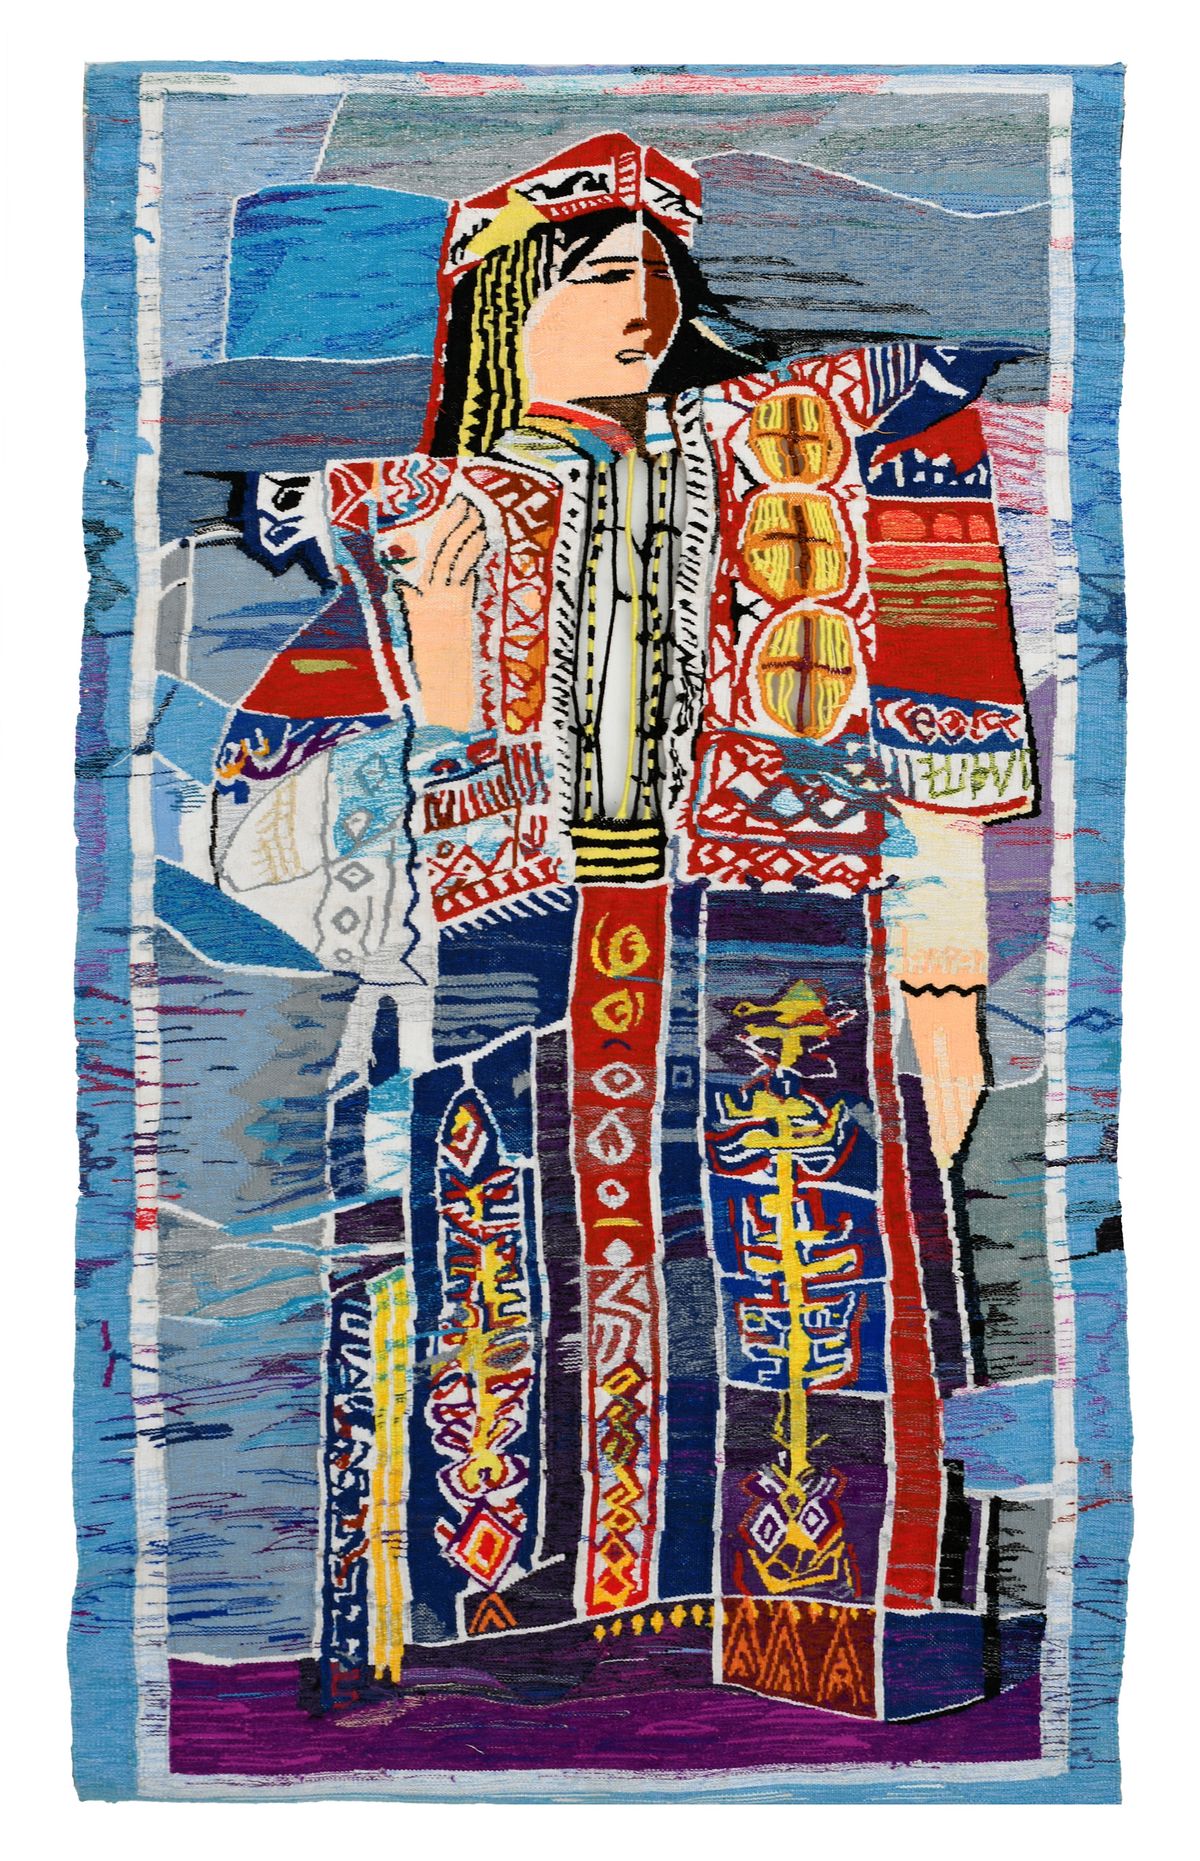 Safia Farhat's tapestry Amités, now part of the Barjeel Art Foundation Collection Image courtesy of Galerie El Marsa